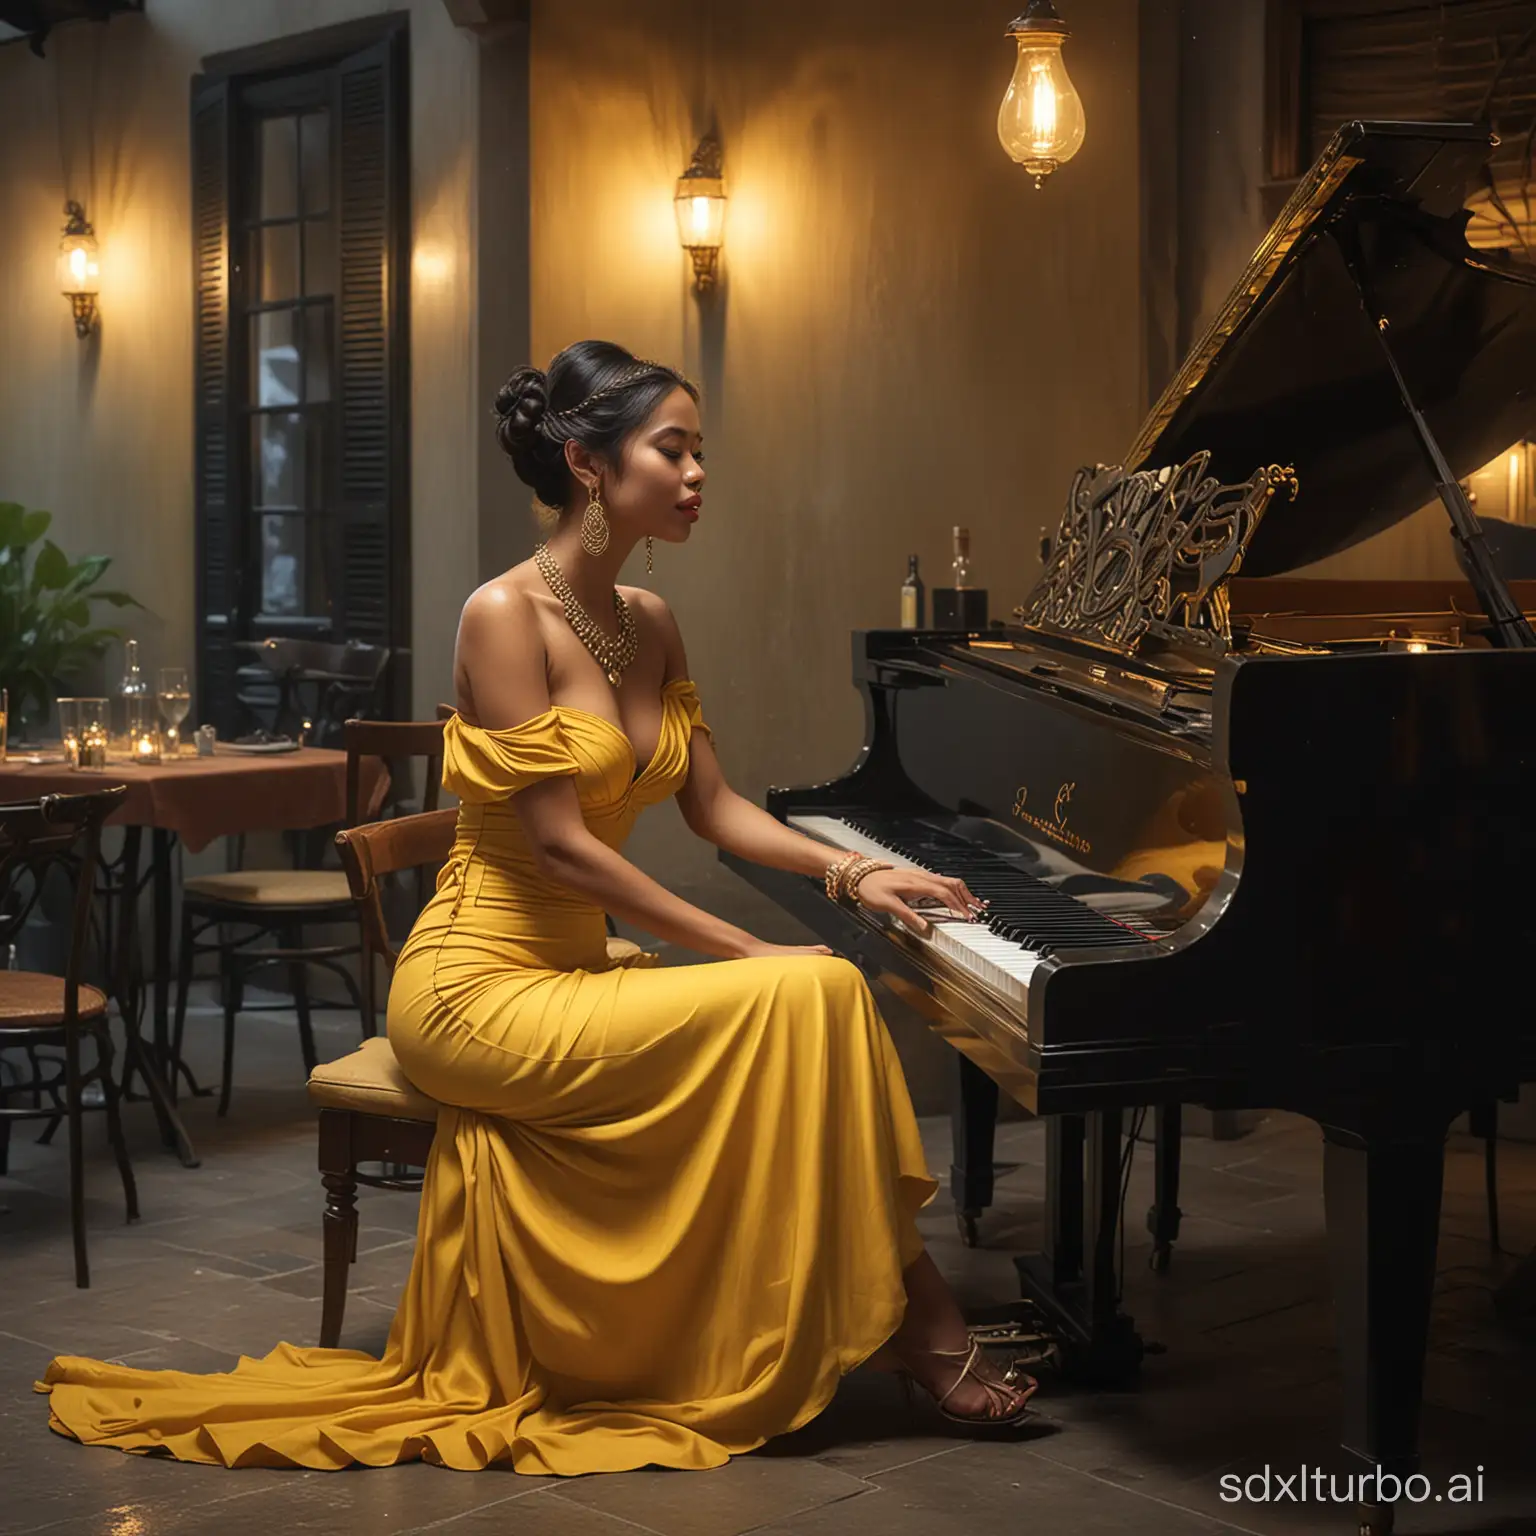 Elegant-Indonesian-Woman-Playing-Jazz-Piano-in-Dimly-Lit-Luxury-Outdoor-Cafe